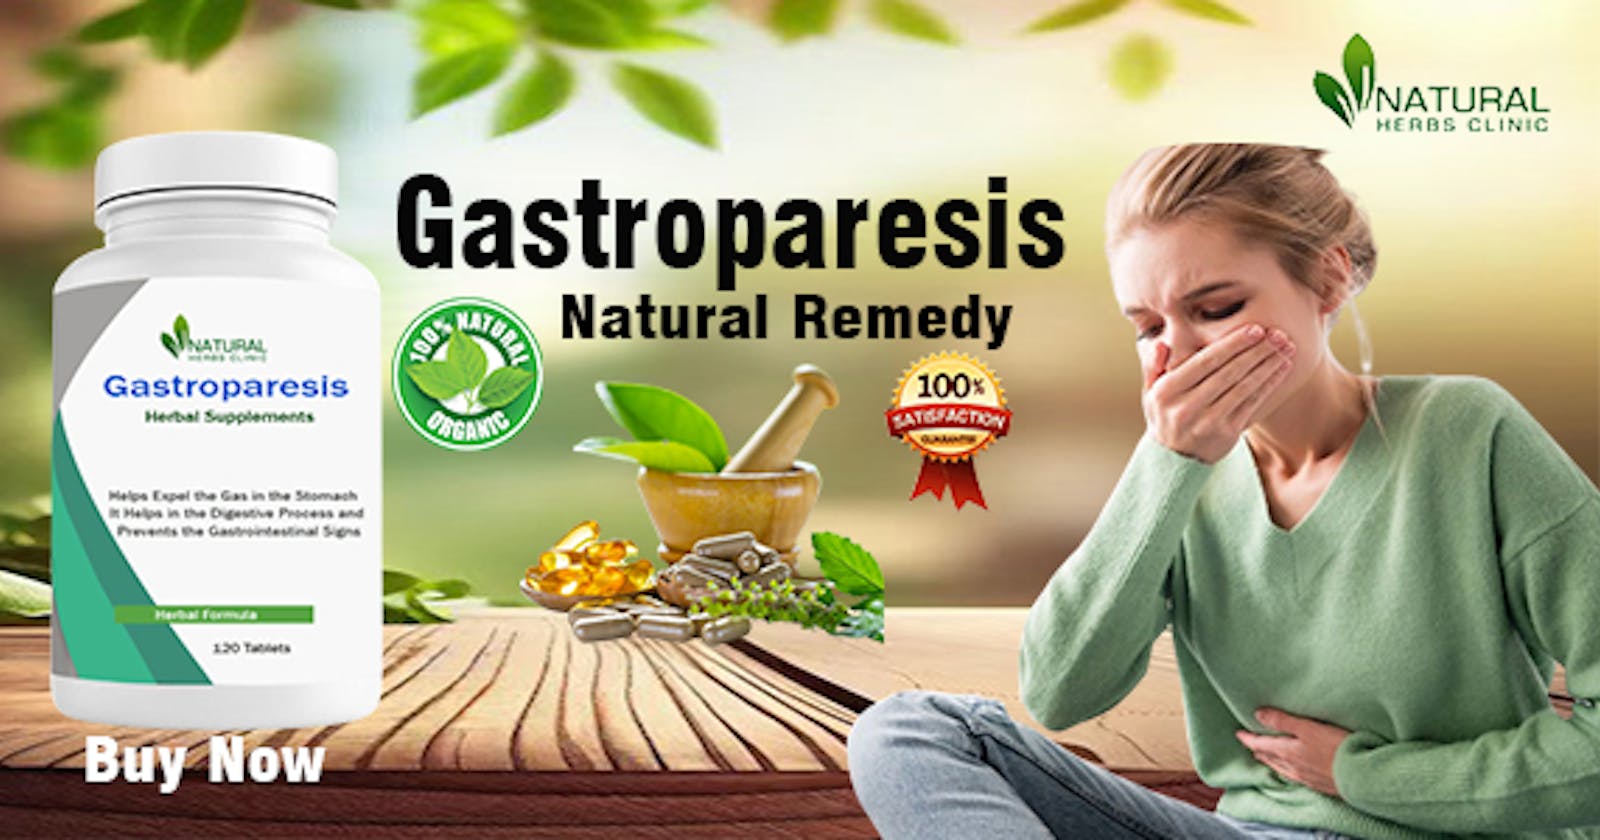 Gastroparesis Struggles? Try These Incredible Home Remedies for Relief